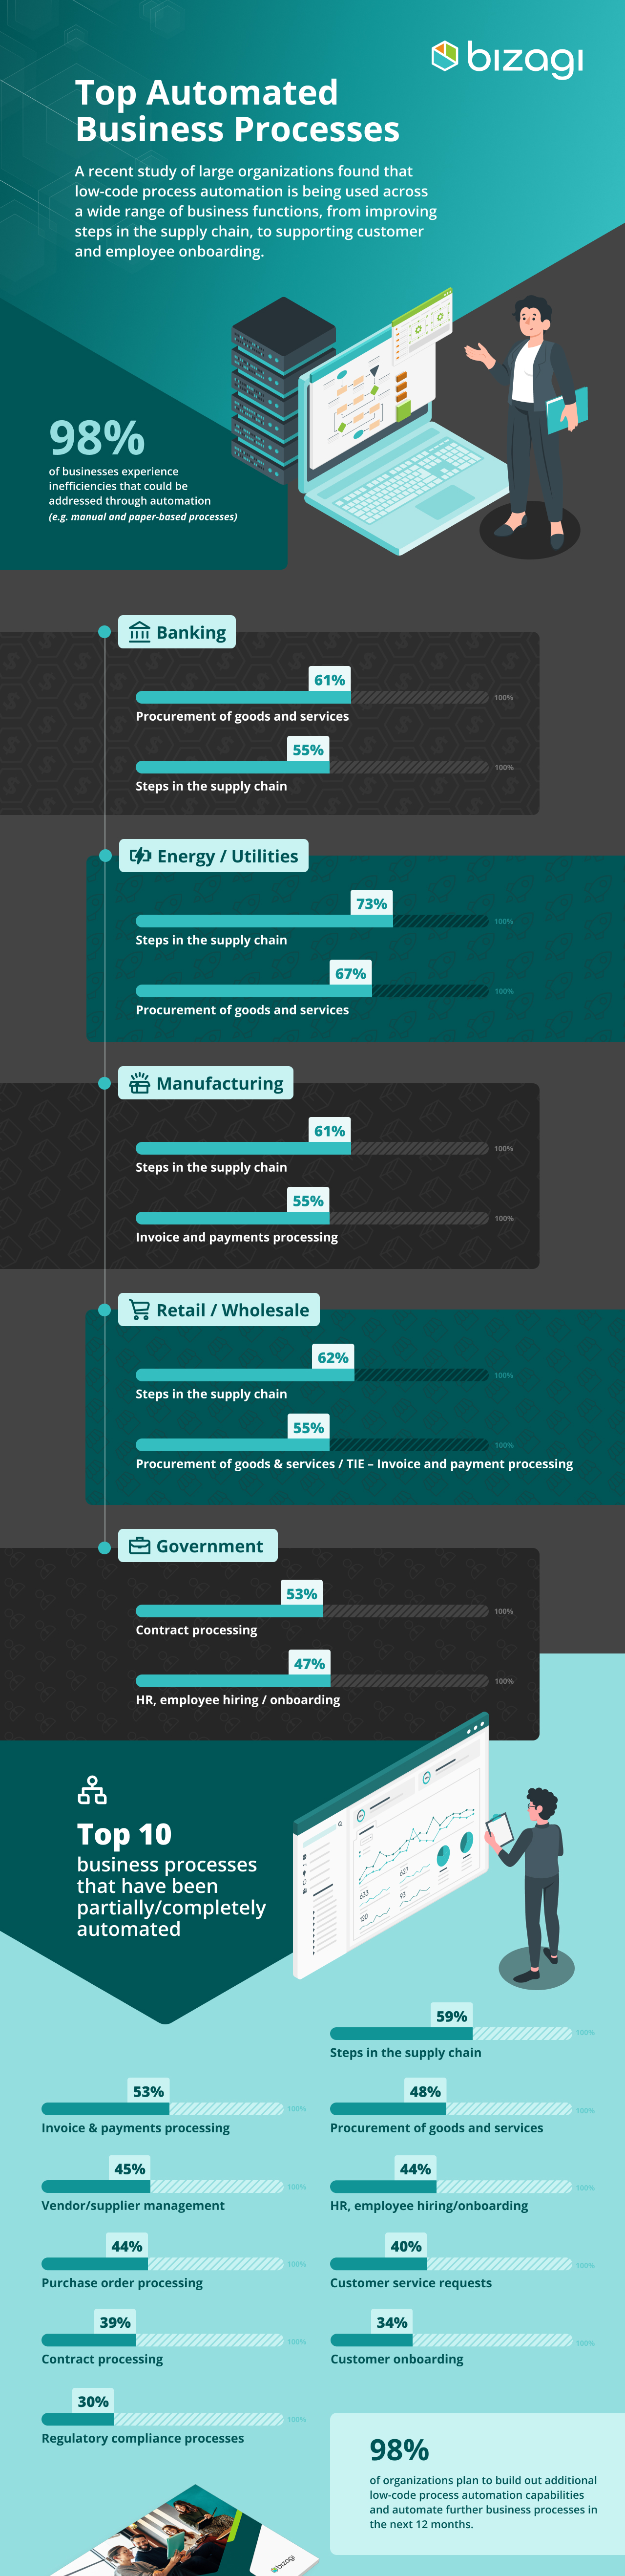 Top automated processes -infographic Bizagi.jpg